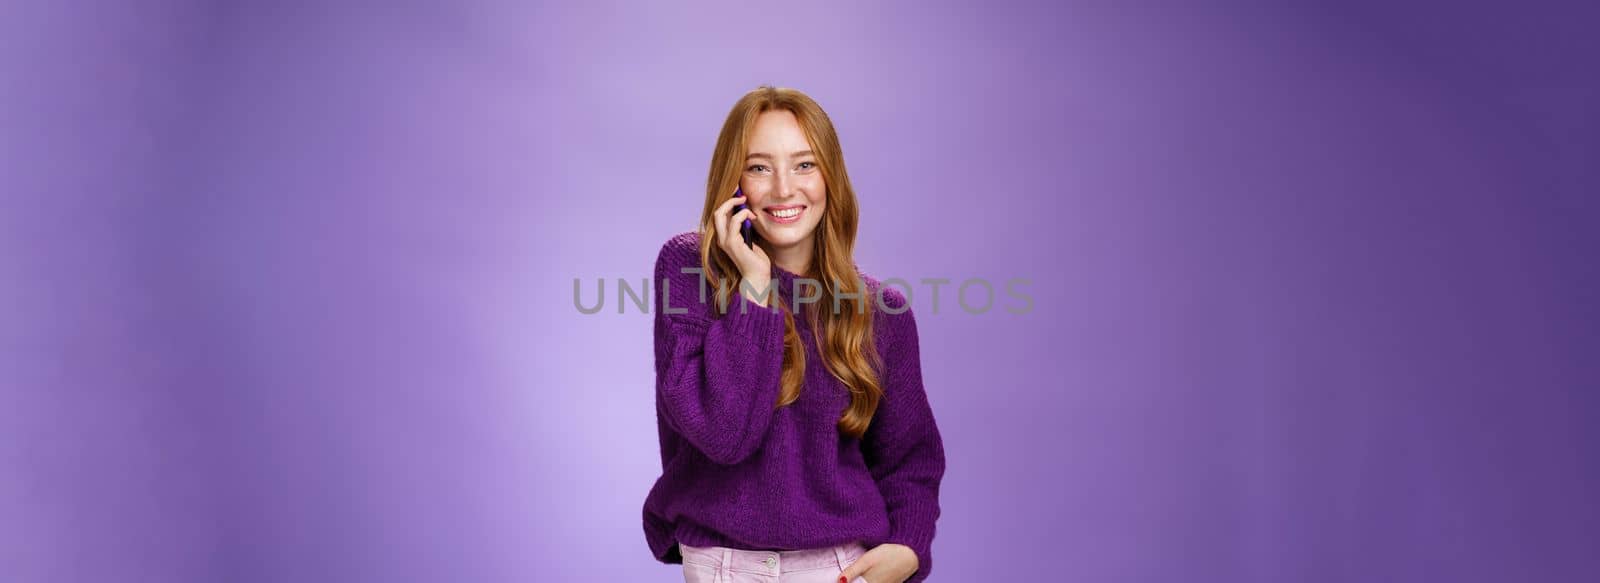 Girl likes talking on mobile phone with funny friend. Portrait of carefree charming redhead european woman with freckles holding mobile phone near ear as having conversation, laughing joyfully. Technology and communication concept